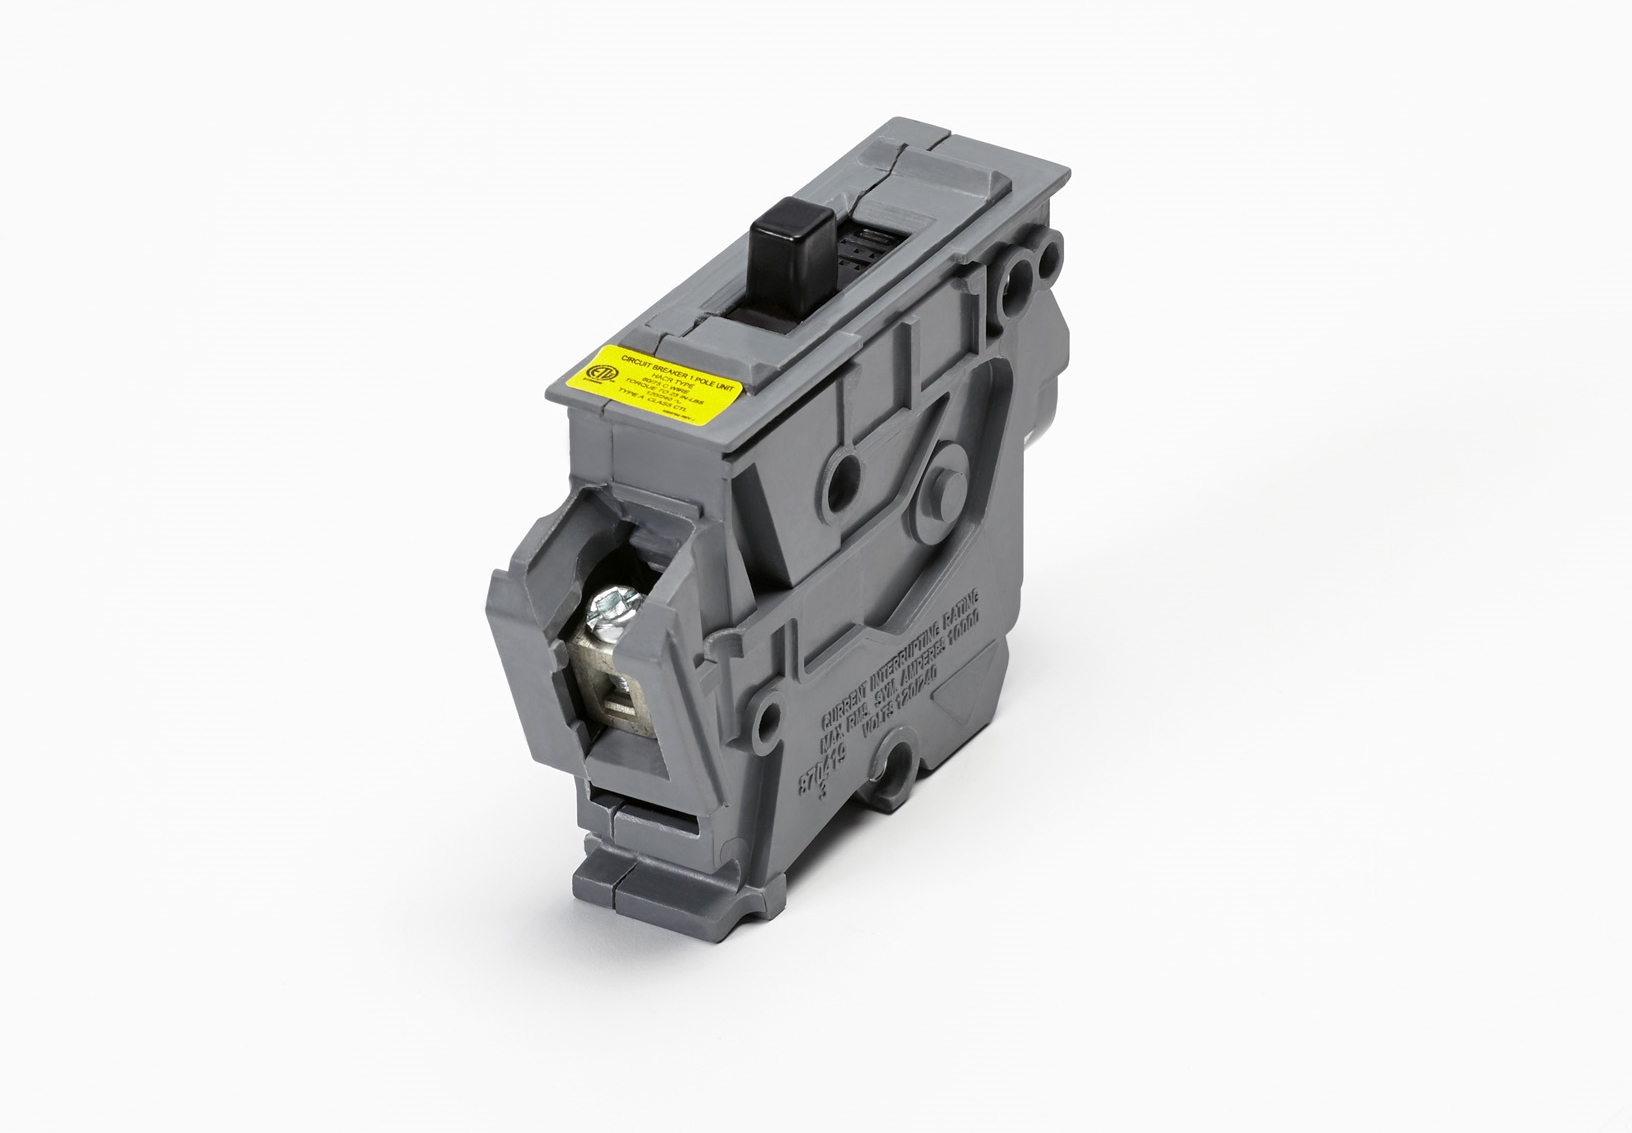 NEW Wadsworth replacement circuit breaker type A by Connecticut Electric. For use in Wadsworth load centers that accept type A (1